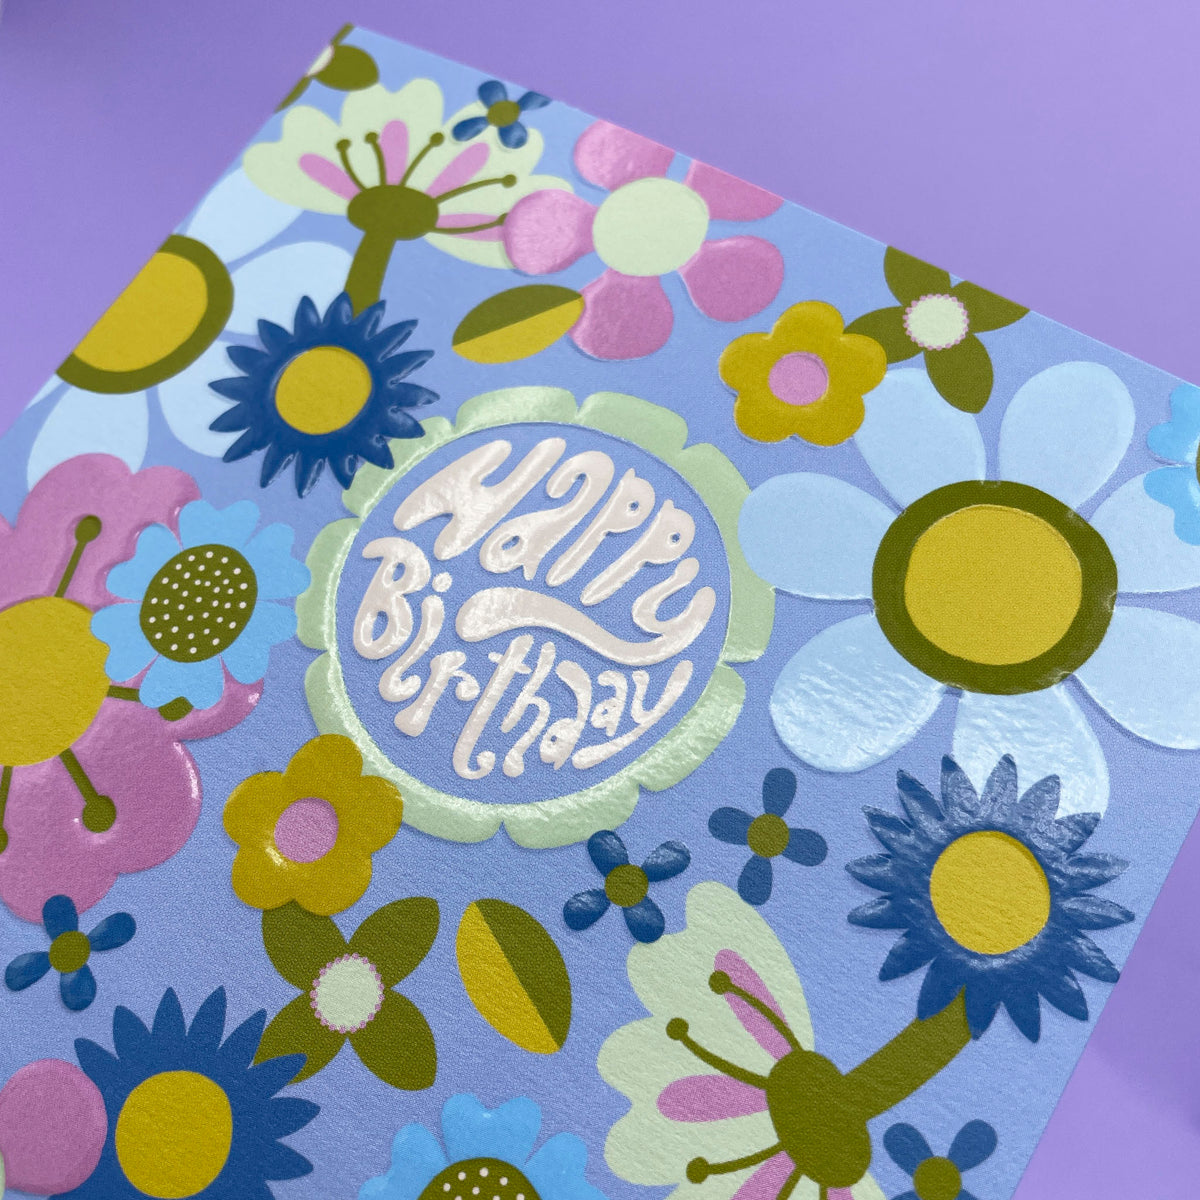 A colourful floral greetings card to celebrate a birthday where the main colour is blue. The wording in the centre of the card is &#39;Happy Birthday&#39;.